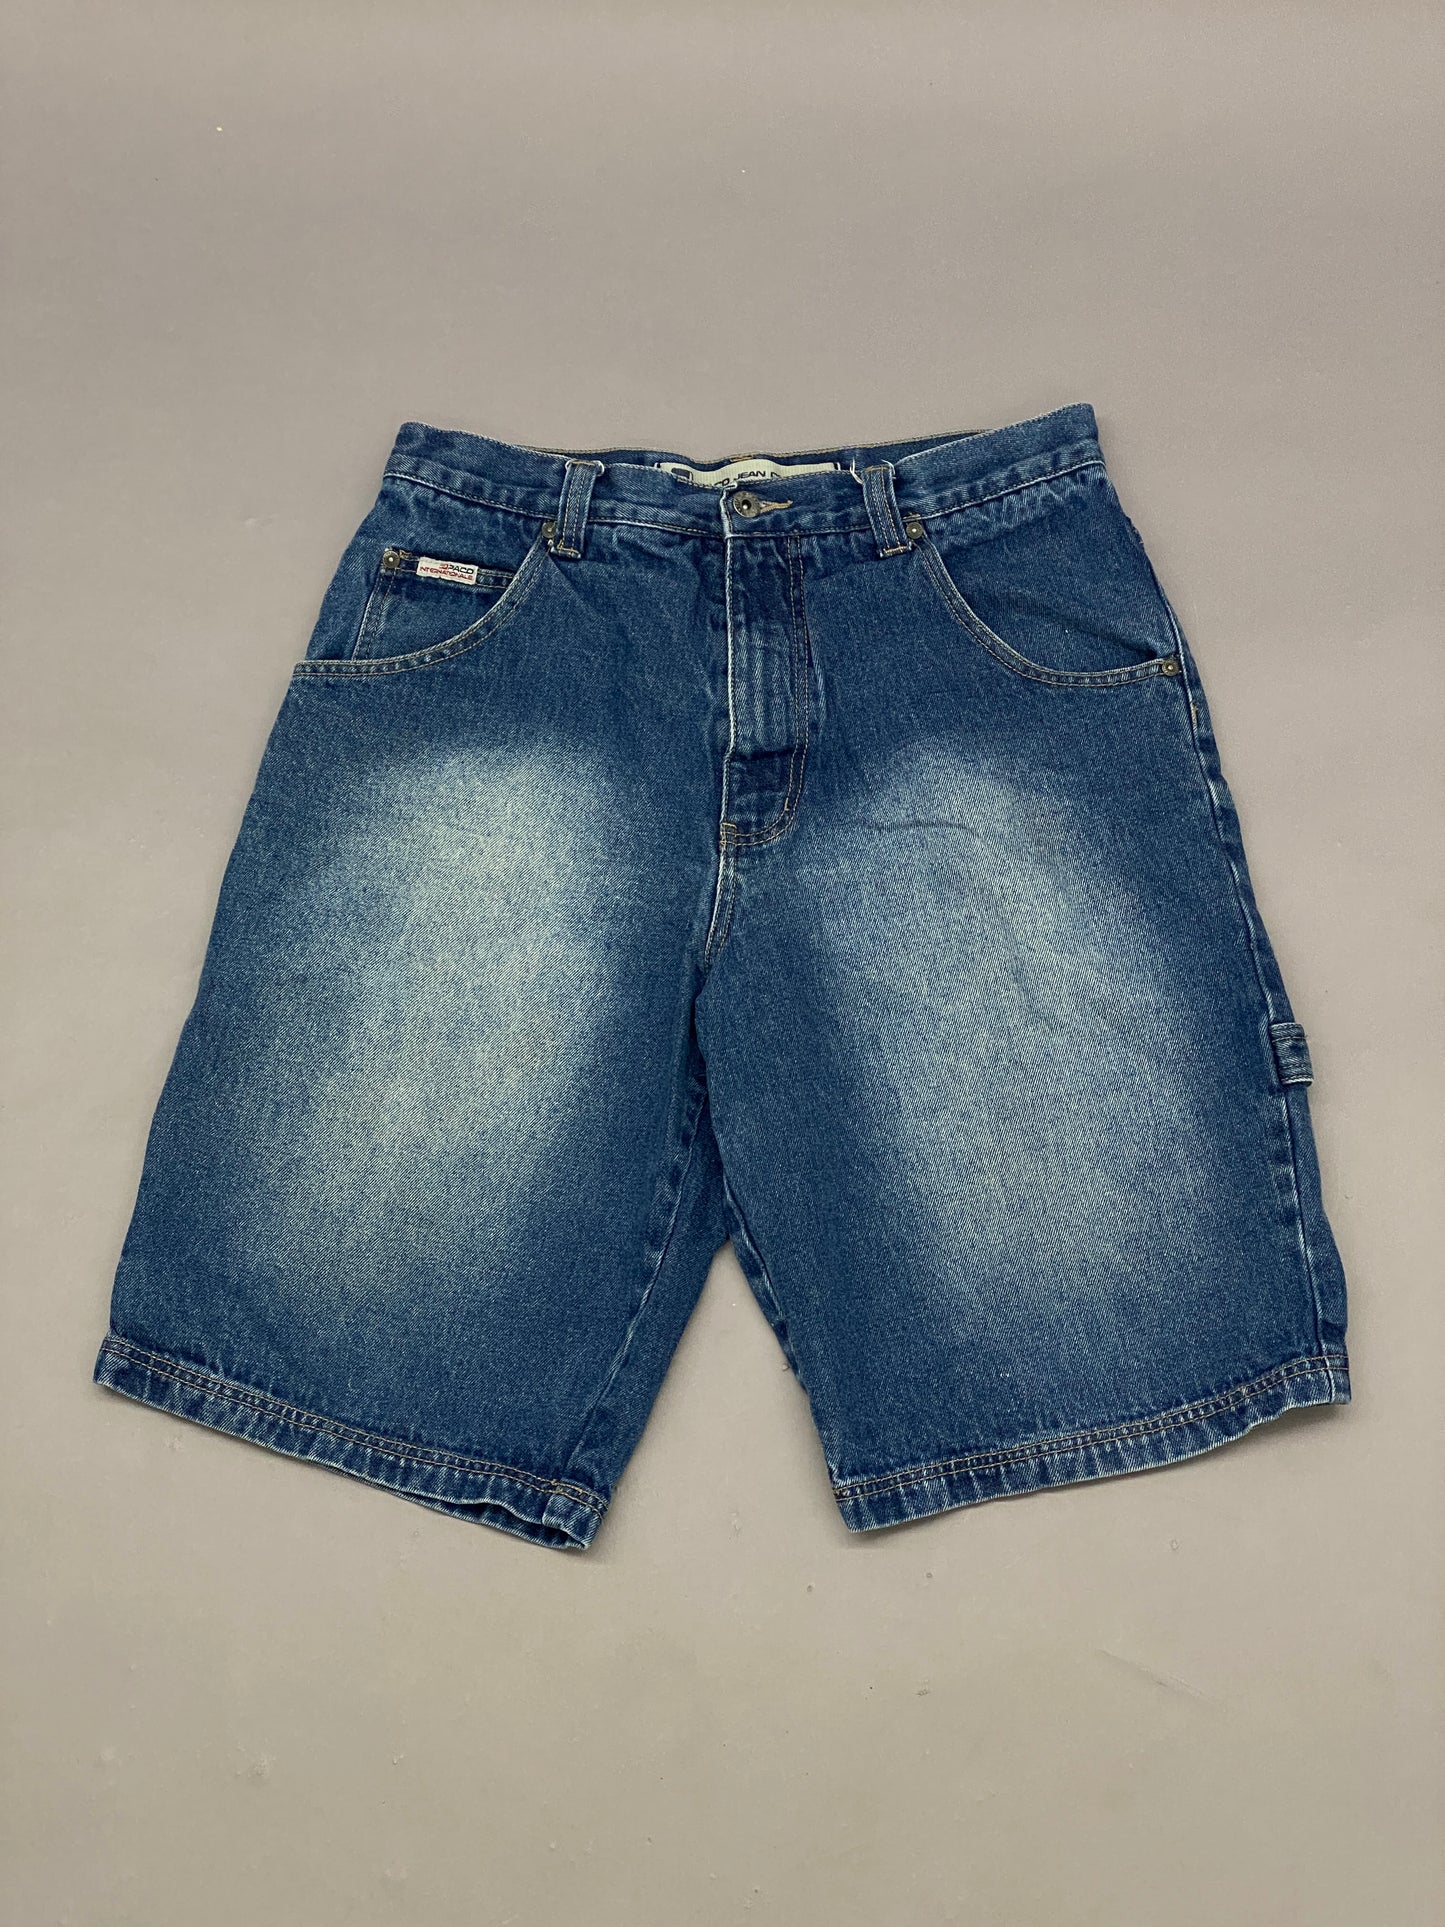 Paco Jeans Vintage Shorts - 34